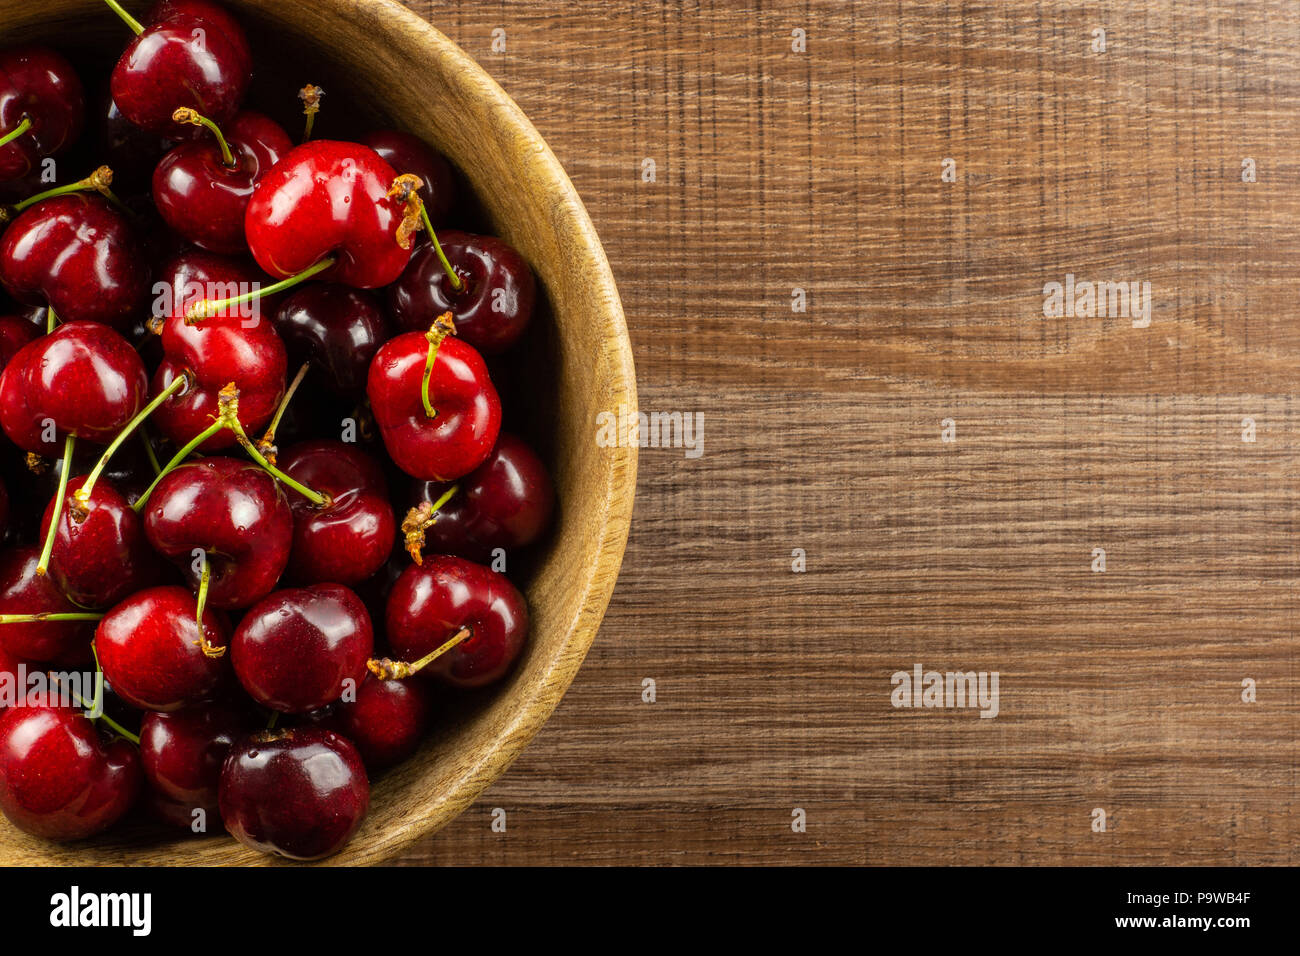 Sweet bright red cherry in a wooden bowl flatlay on brown wood Stock Photo